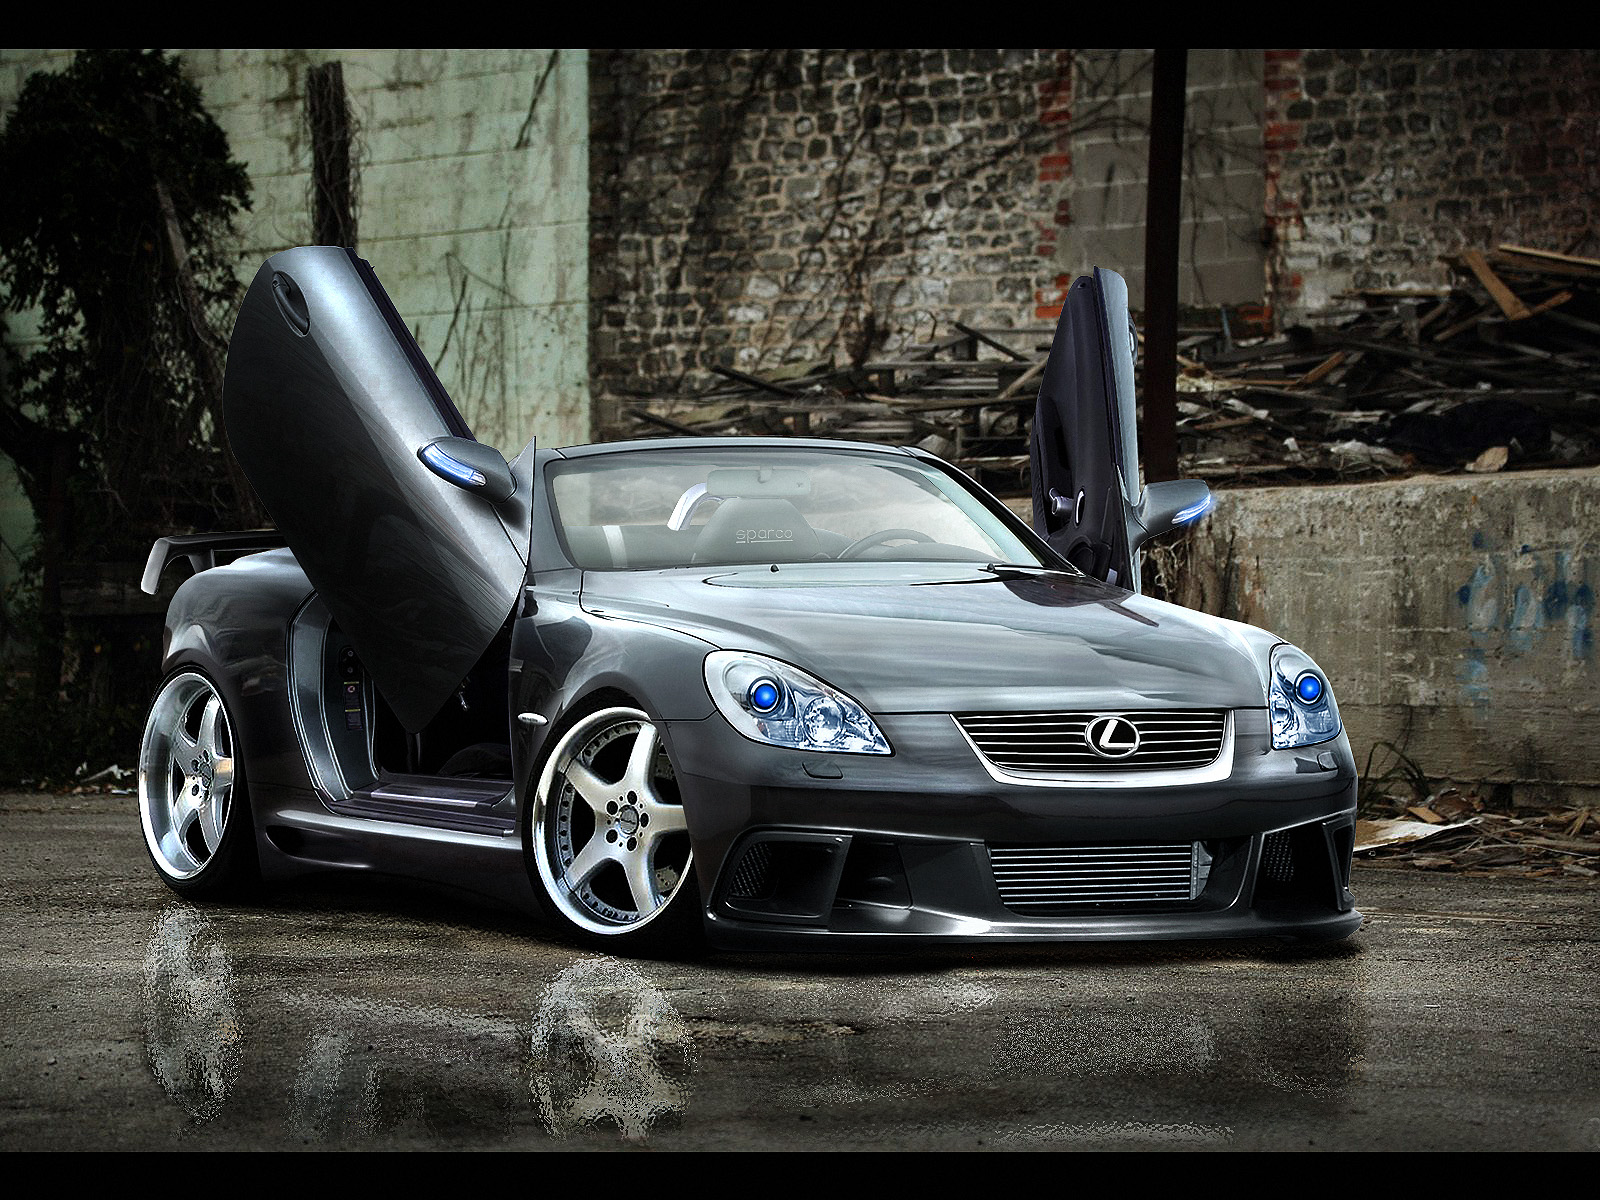 Lexus Cars HD Wallpaper Check Out The Cool Image